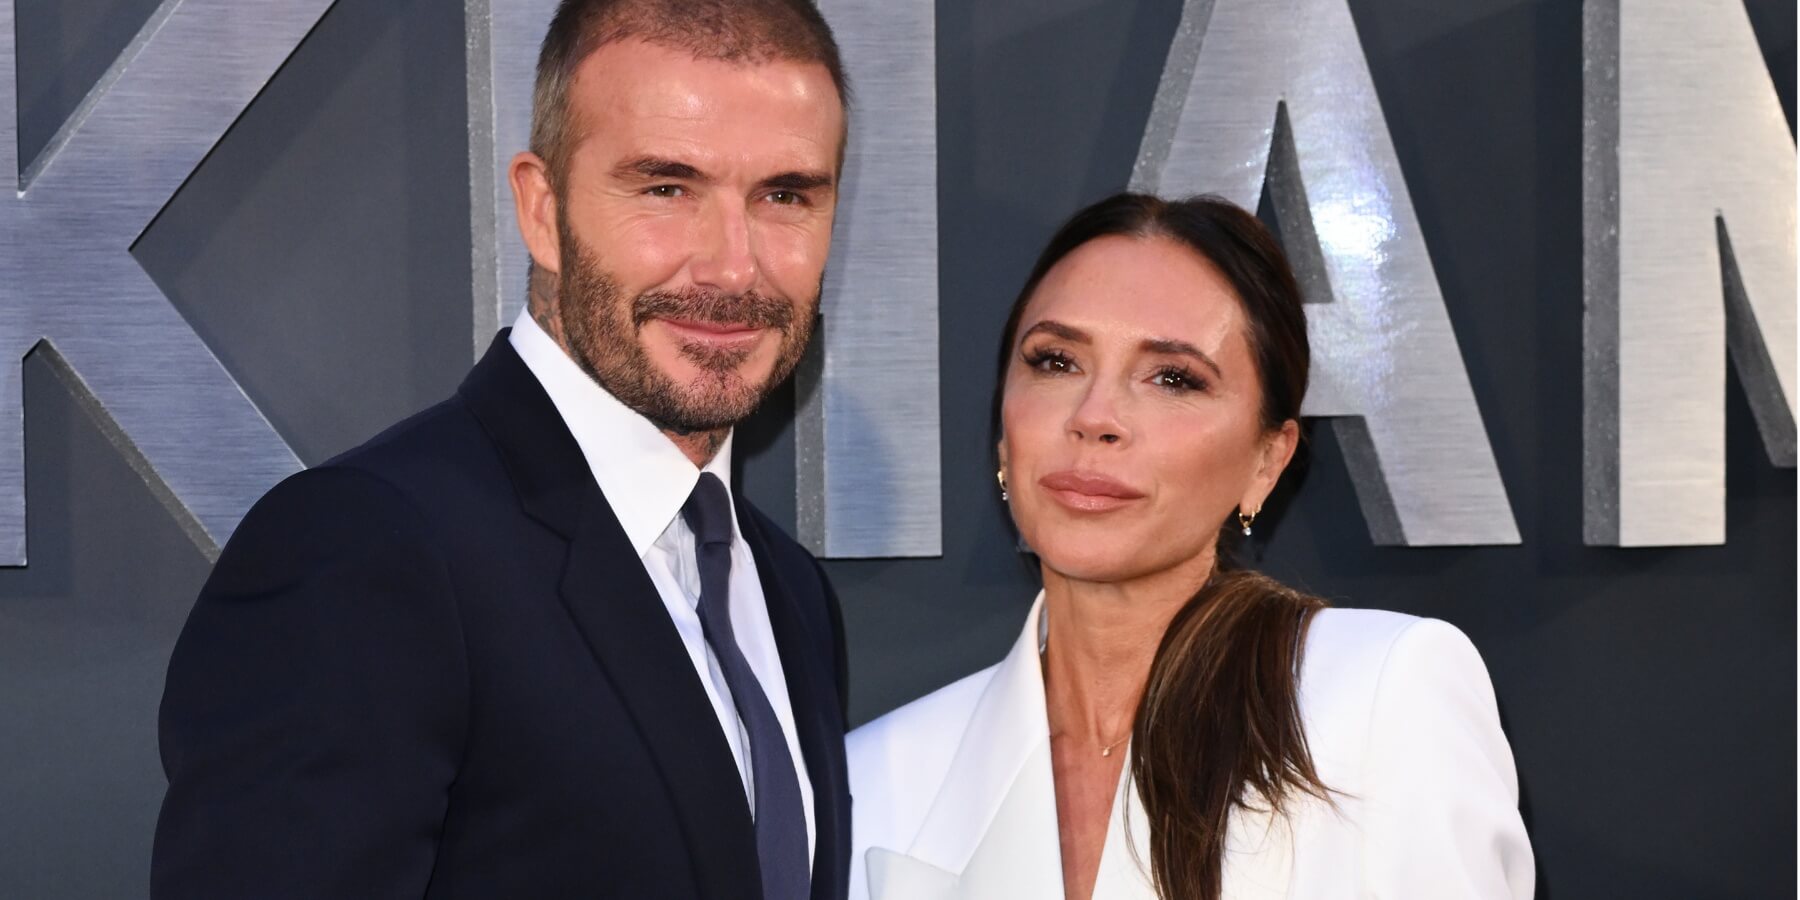 David and Victoria Beckham photographed together in 2023, also appear in the new Uber Eats ad